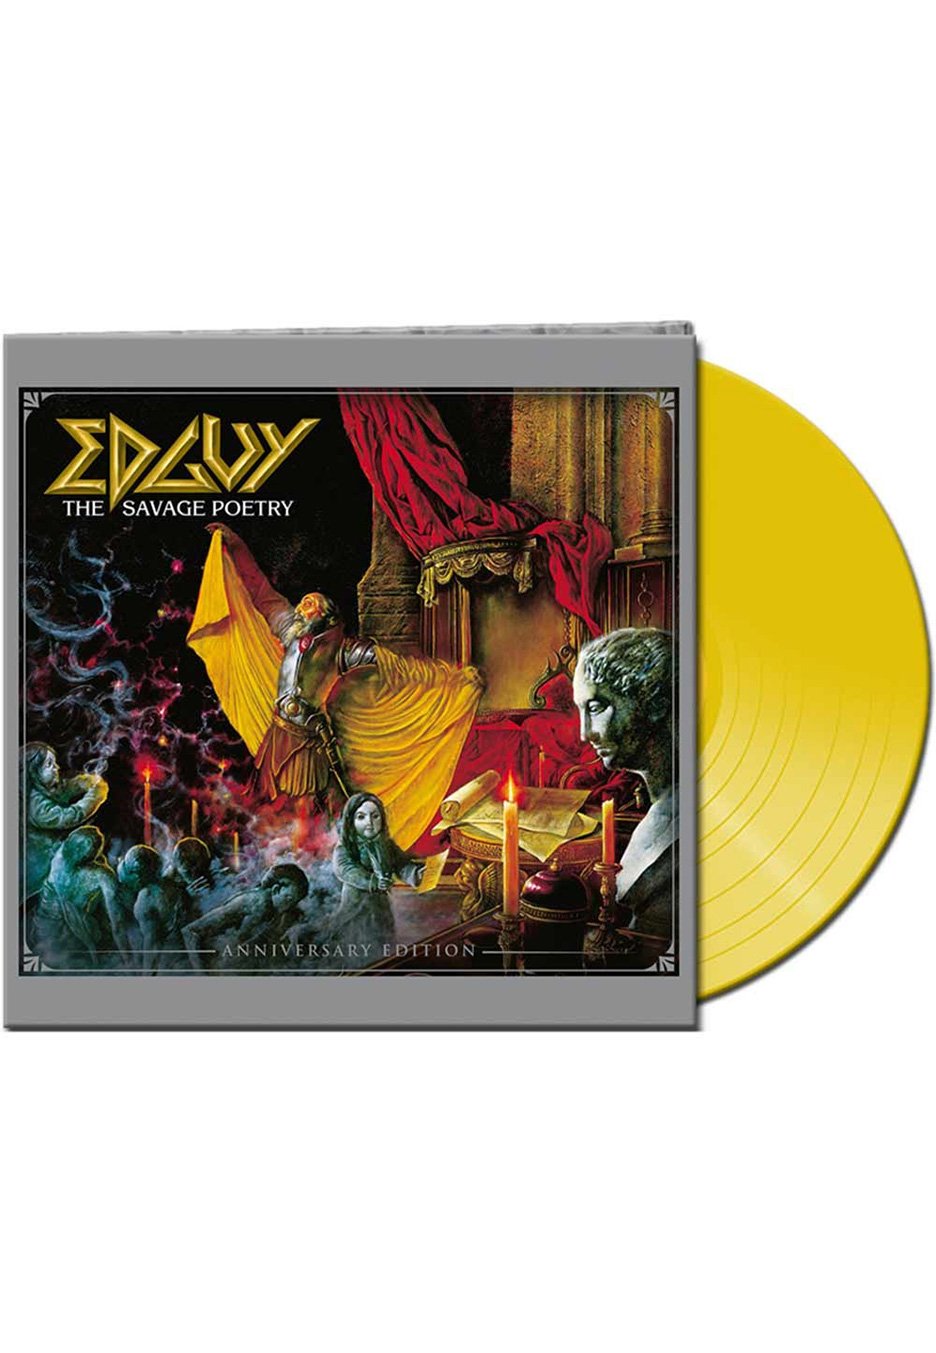 Edguy - The Savage Poetry Anniv. Edition Yellow - Colored Vinyl